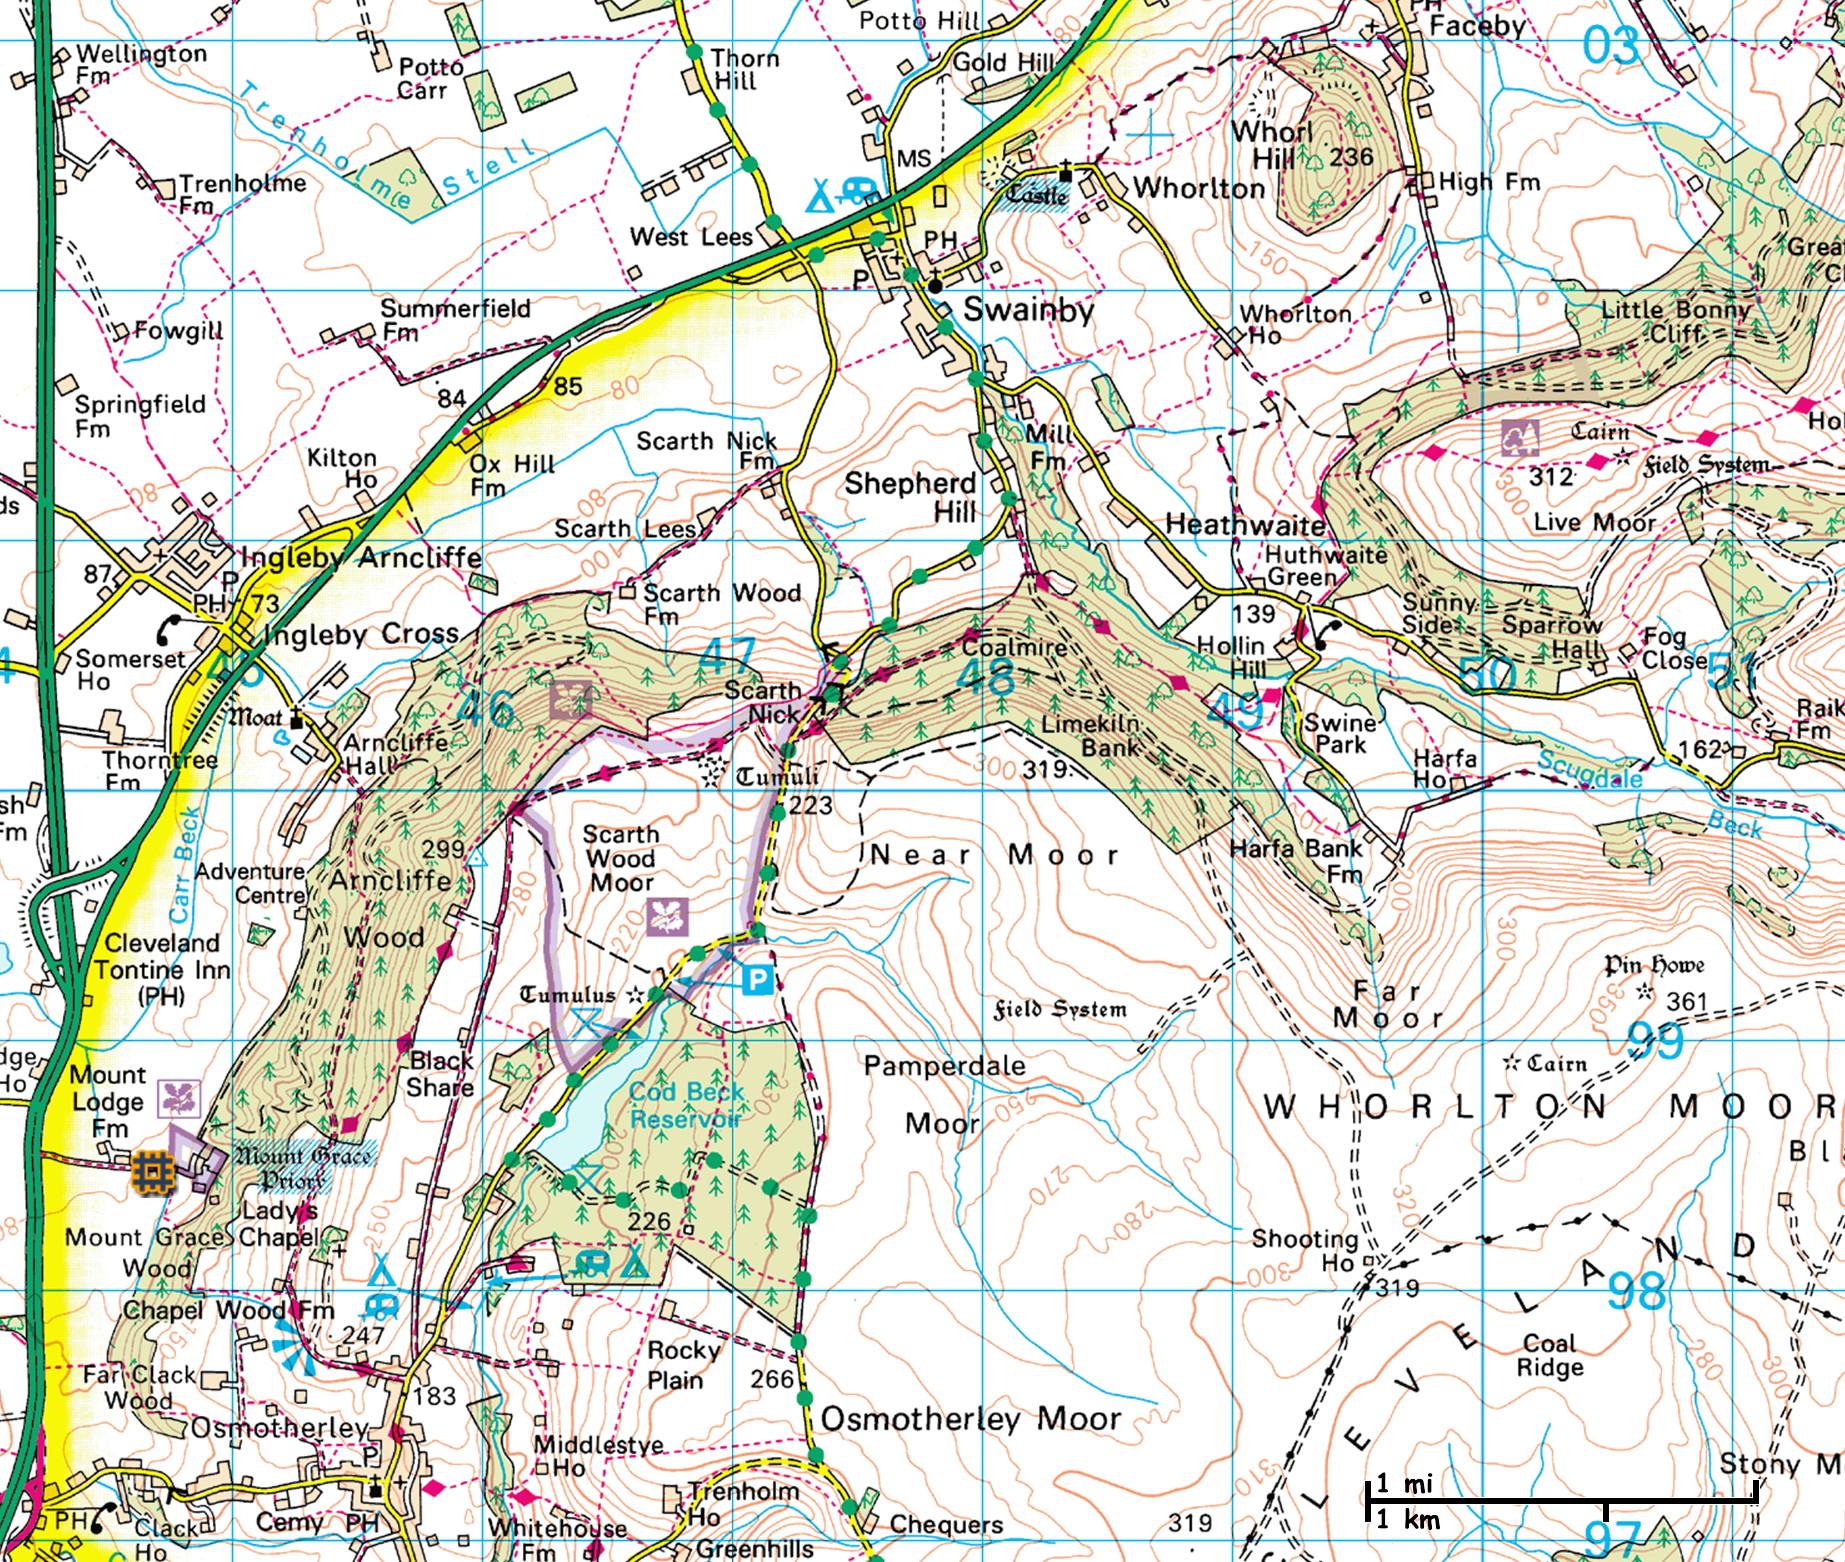 Ordnance Survey map of area south of Swainby